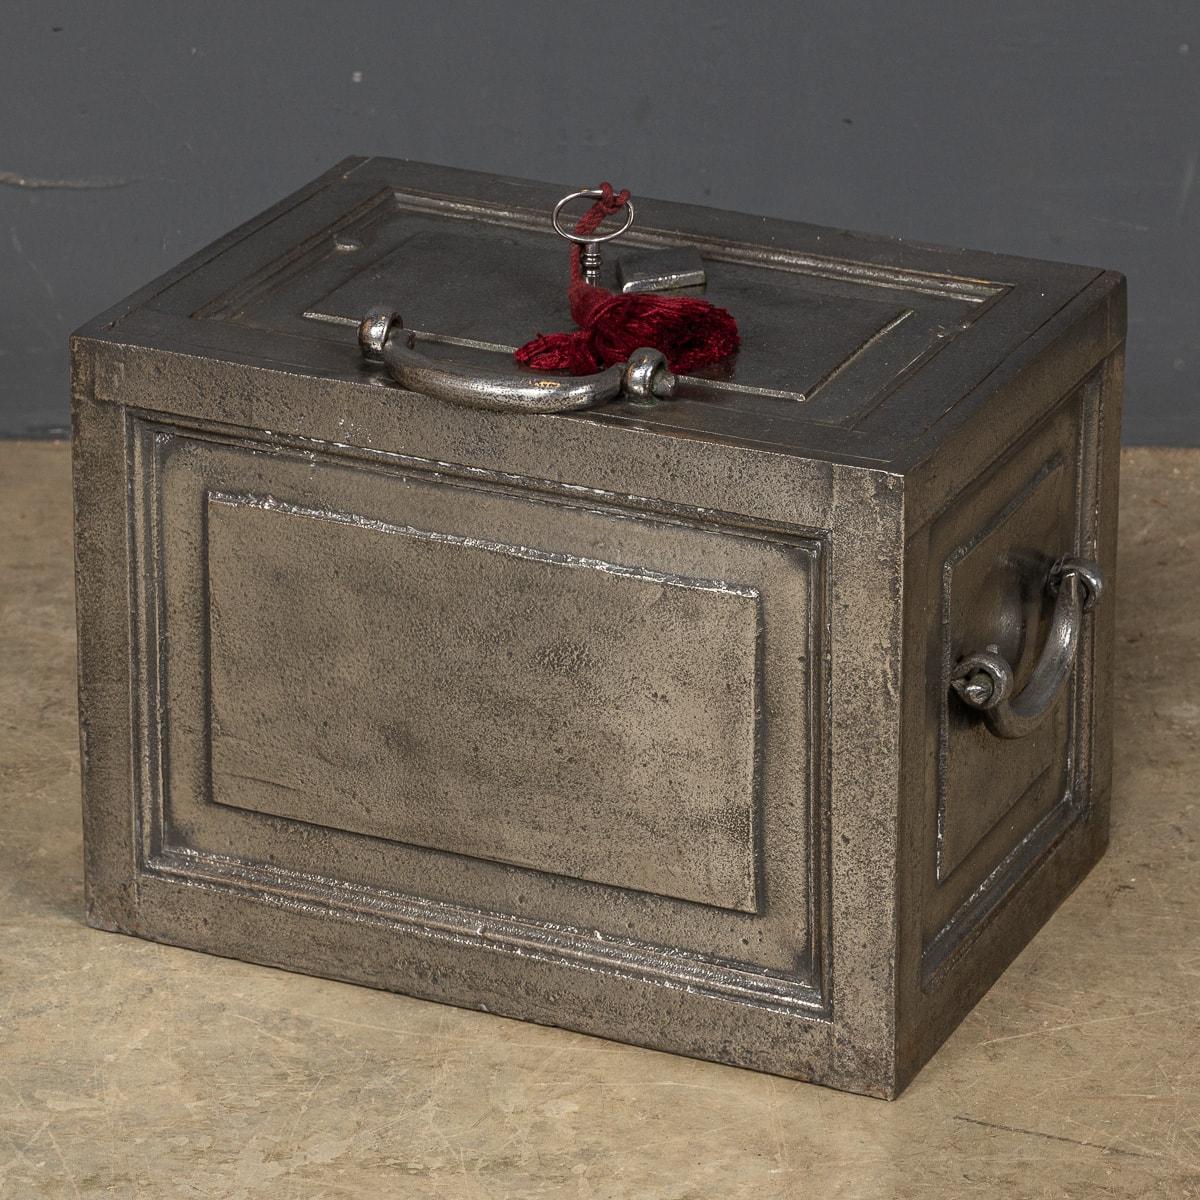 Antique early-19th century Georgian cast iron strongbox safe. Primarily used for the transport of document or valuables this was one of the first fireproof safes available.

CONDITION
In Good Condition - wear as expected.

Size
Height: